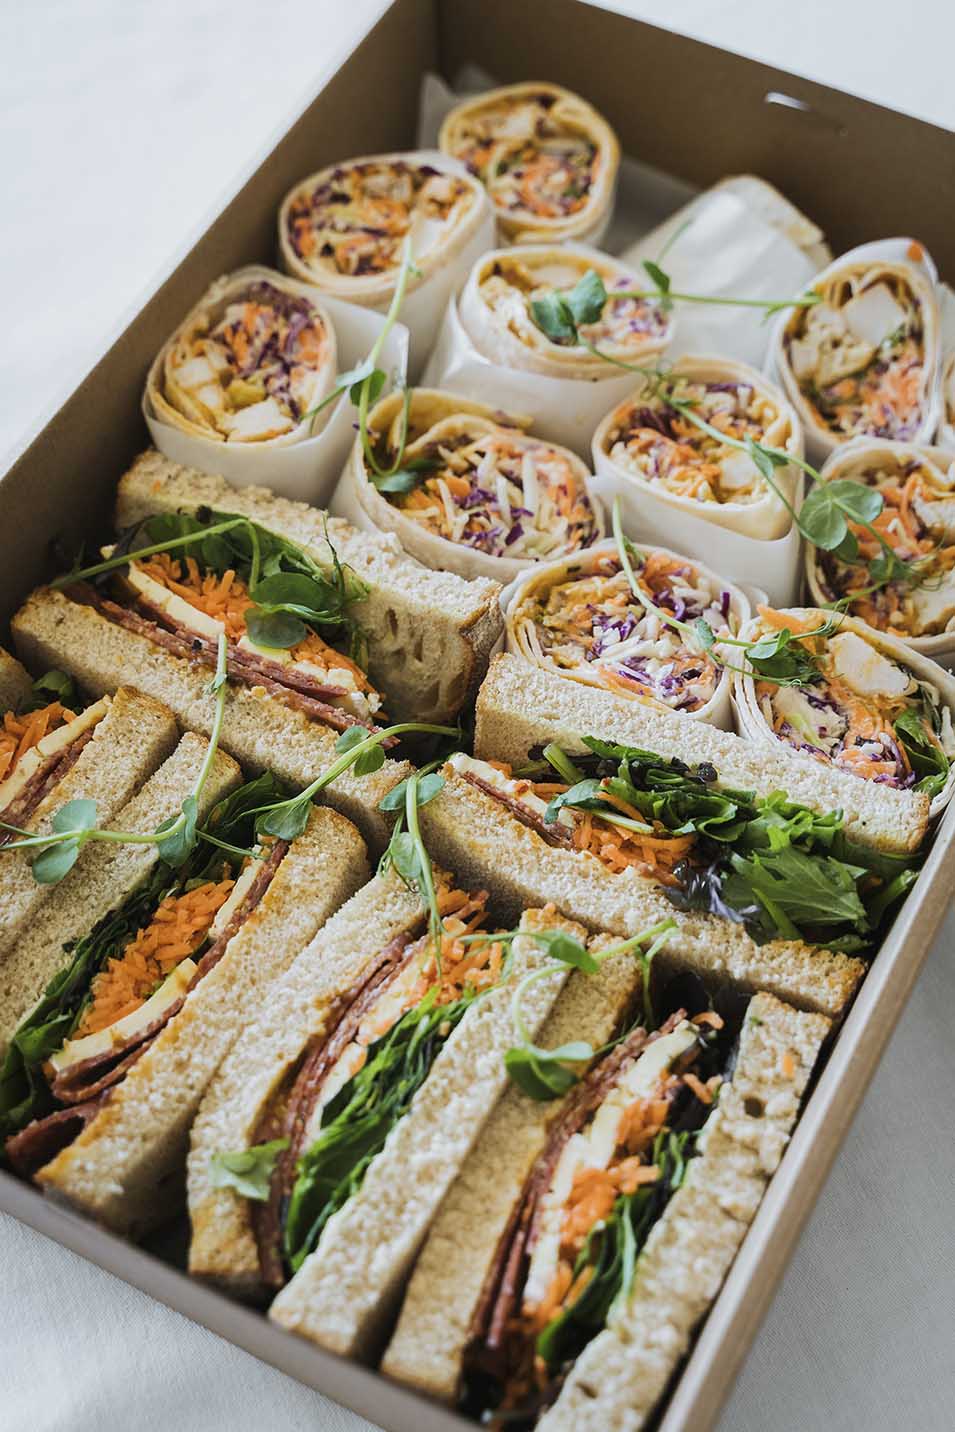 Sandwiches and wraps platter 